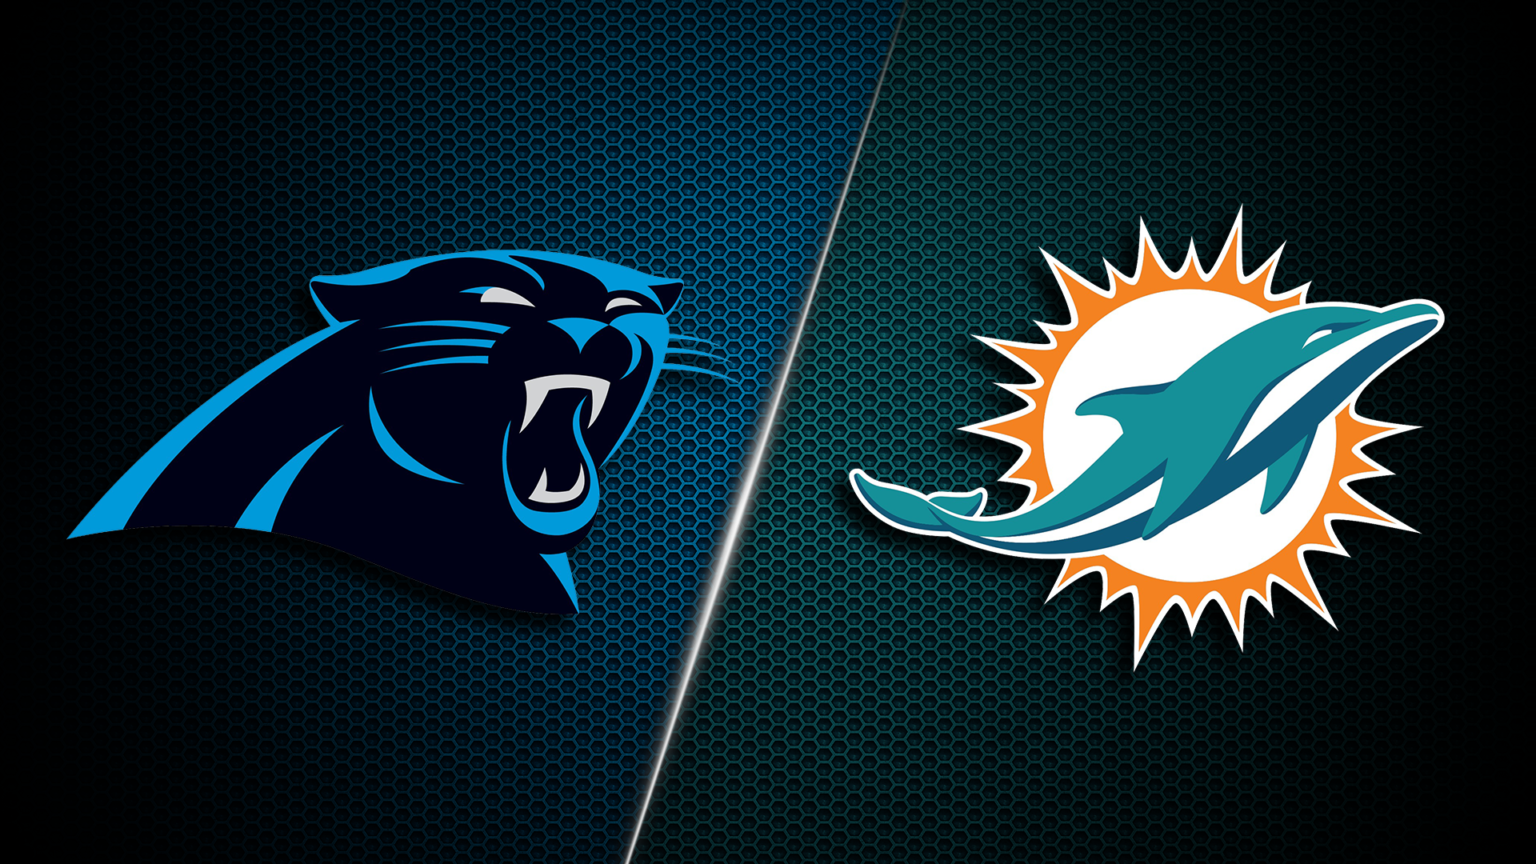 Miami Dolphins vs. Carolina Panthers on SNF How to Watch, Listen